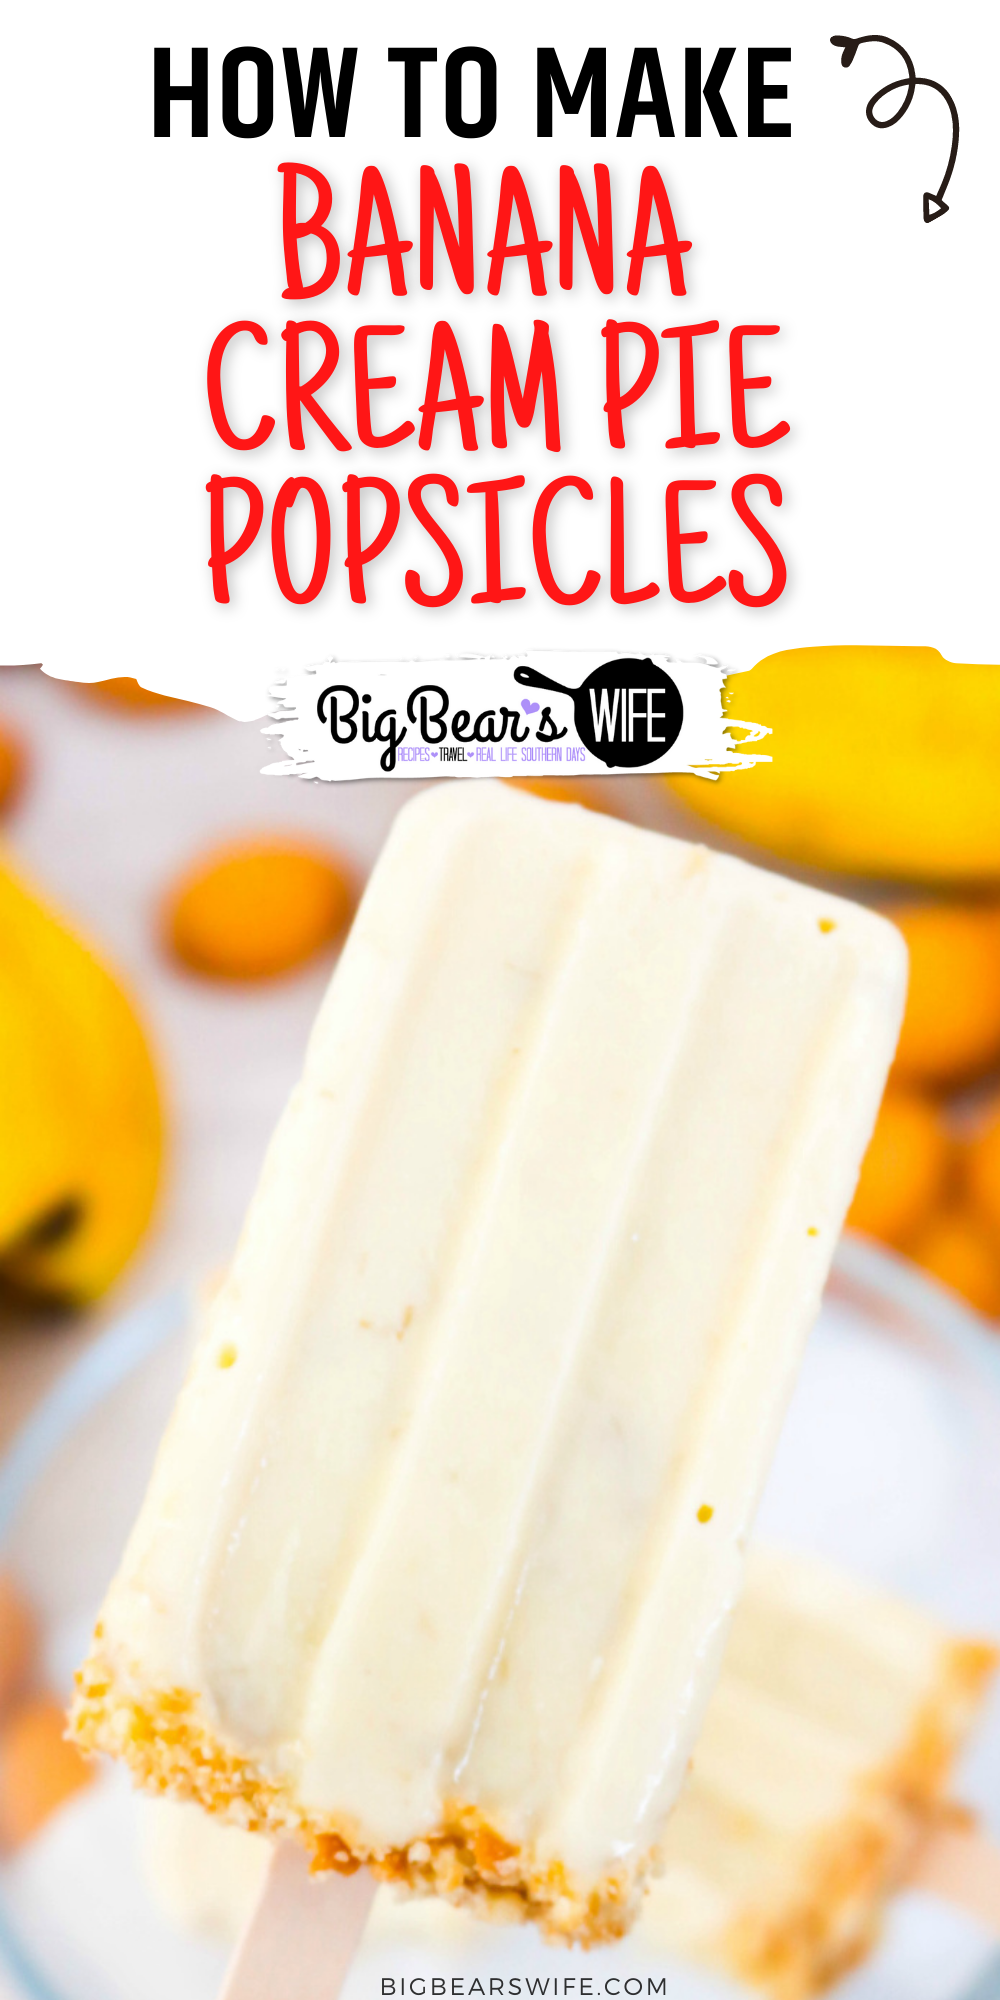 These Banana Cream Pie Popsicles have the amazing classic flavor of a banana cream pie molded and frozen into homemade popsicles. Cool and creamy with a crushed vanilla wafer topping. via @bigbearswife